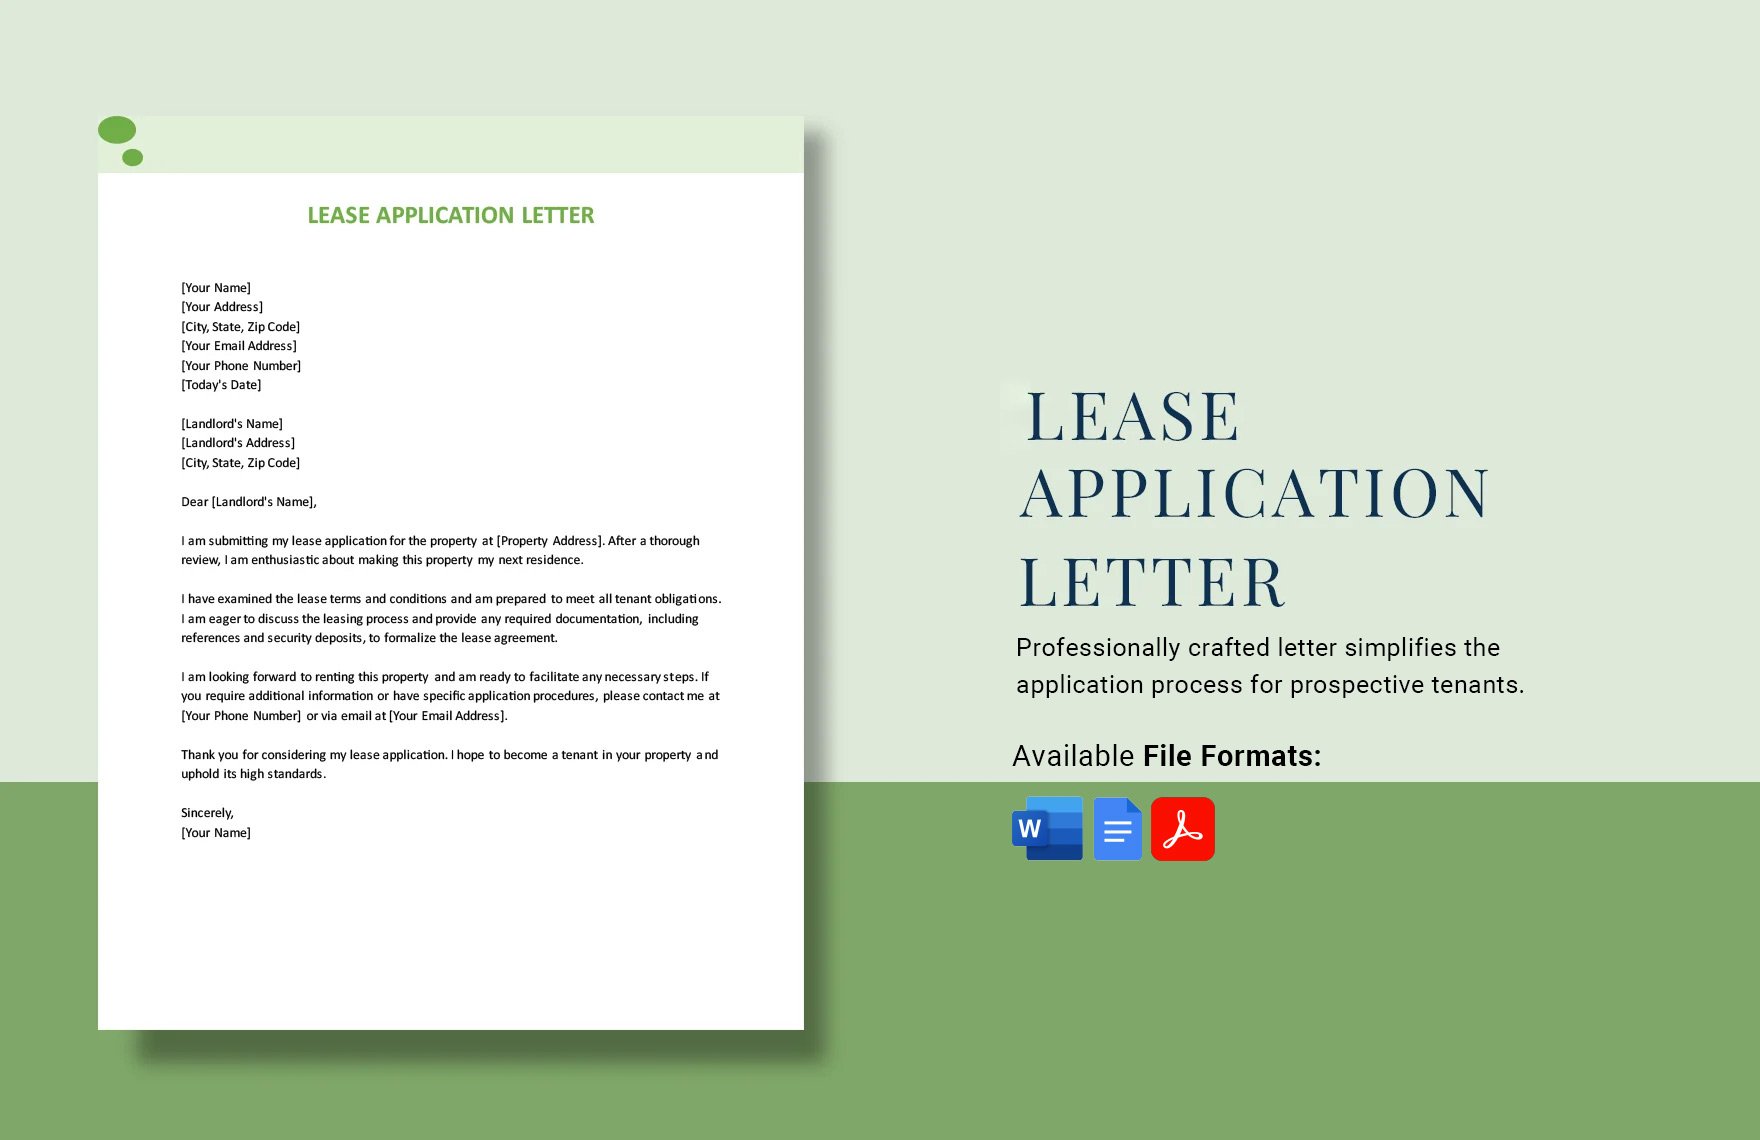 Lease Application Letter in Word, Google Docs, PDF